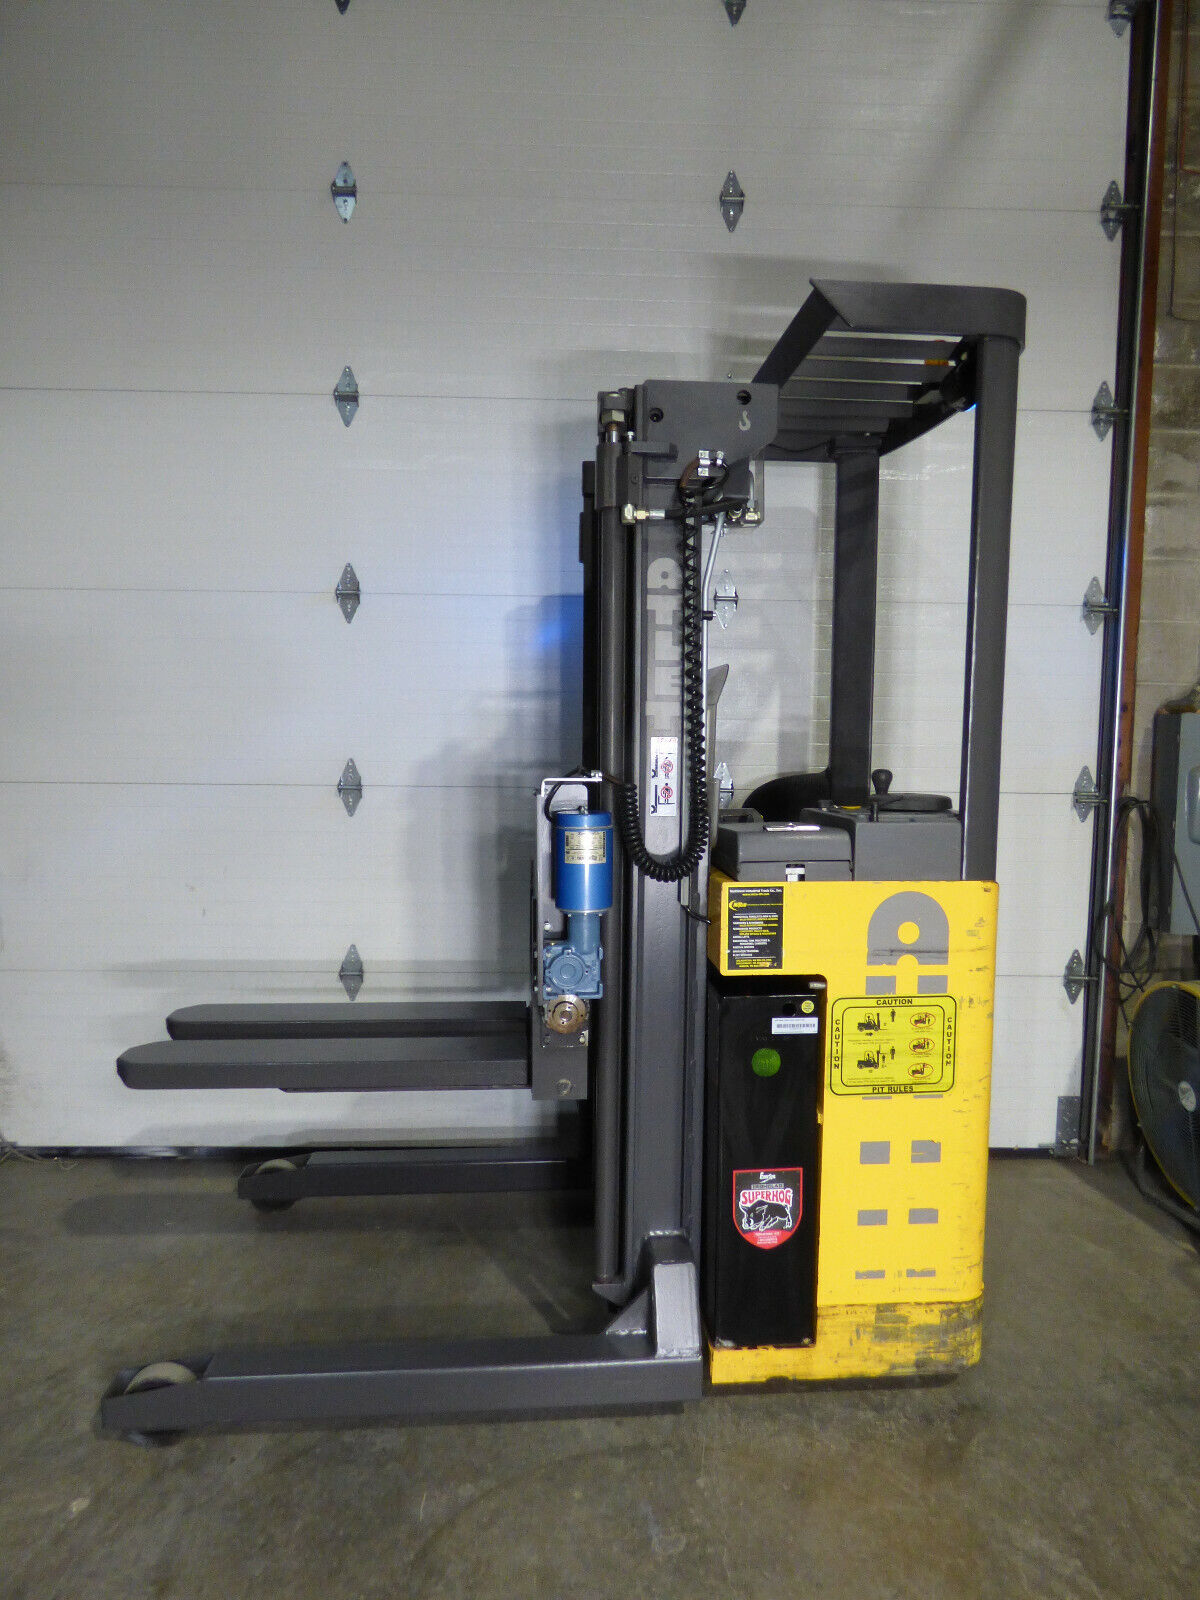 2006 Atlet Ergo Straddle Reach Truck 2356 Hrs 2200lbs Nice